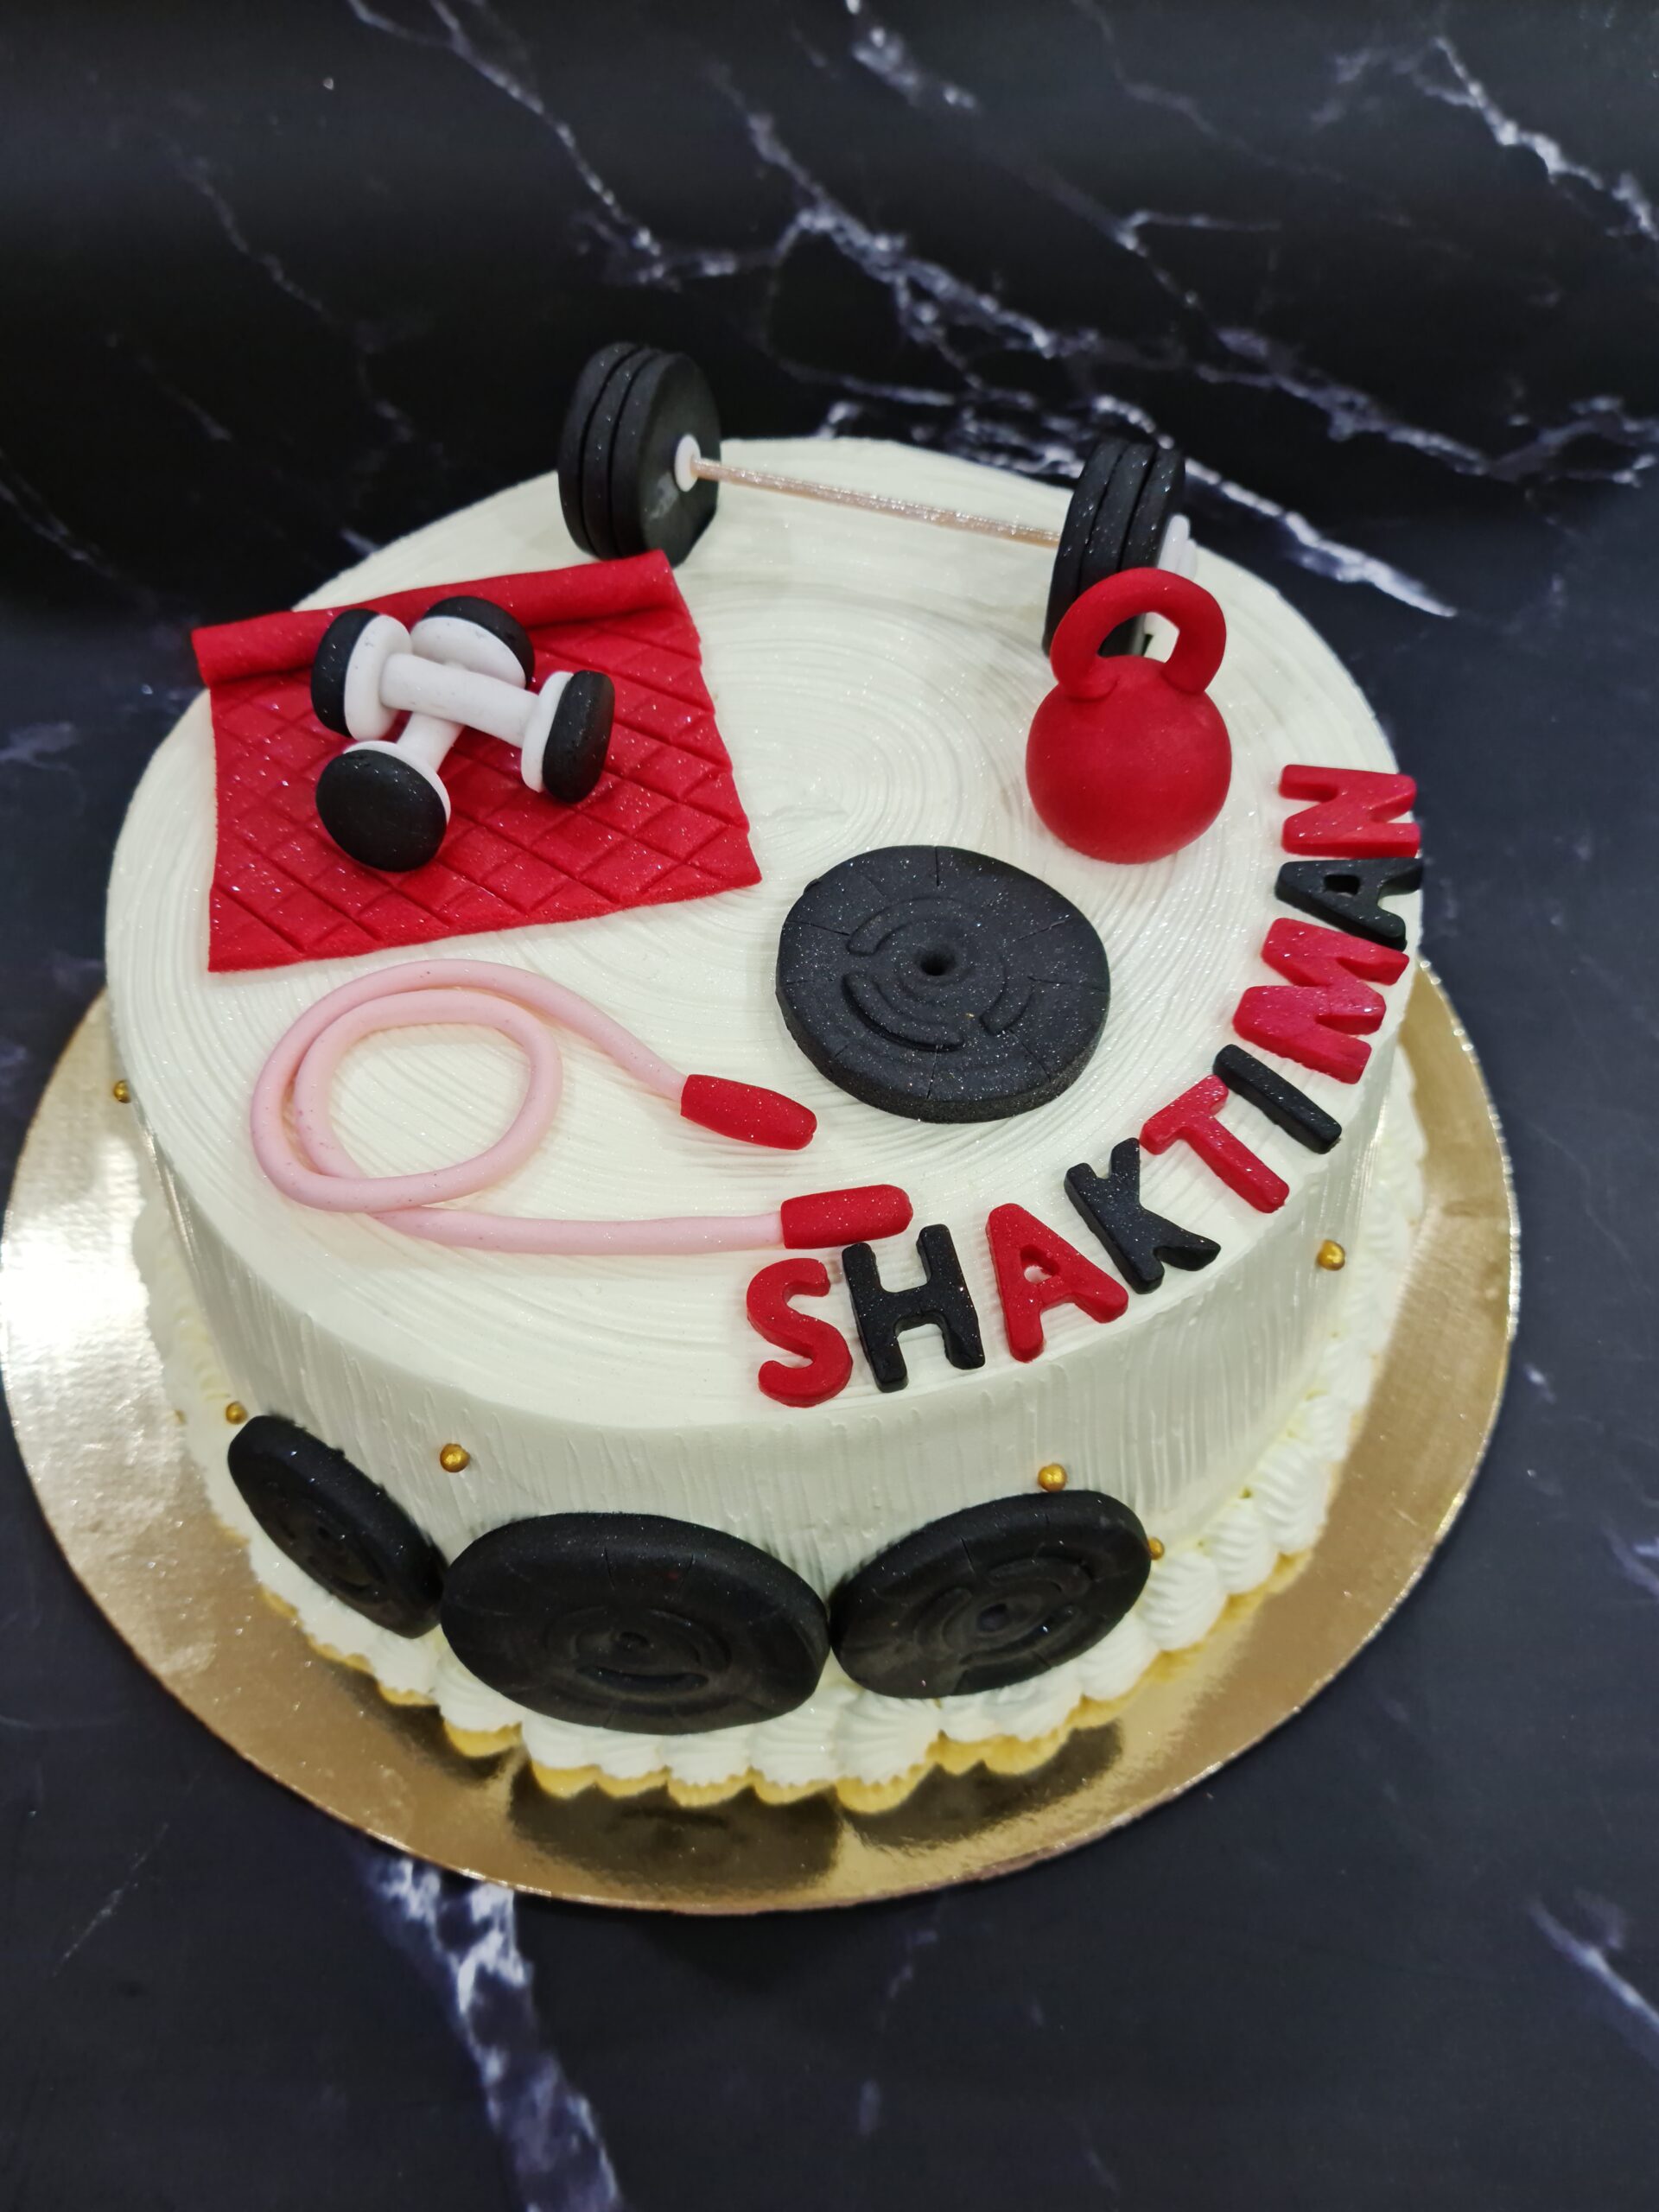 1 KG GYM Theme Cake, Super Cake- Online Cake delivery in Noida, Cake Shops  with Midnight & Same Day Delivery